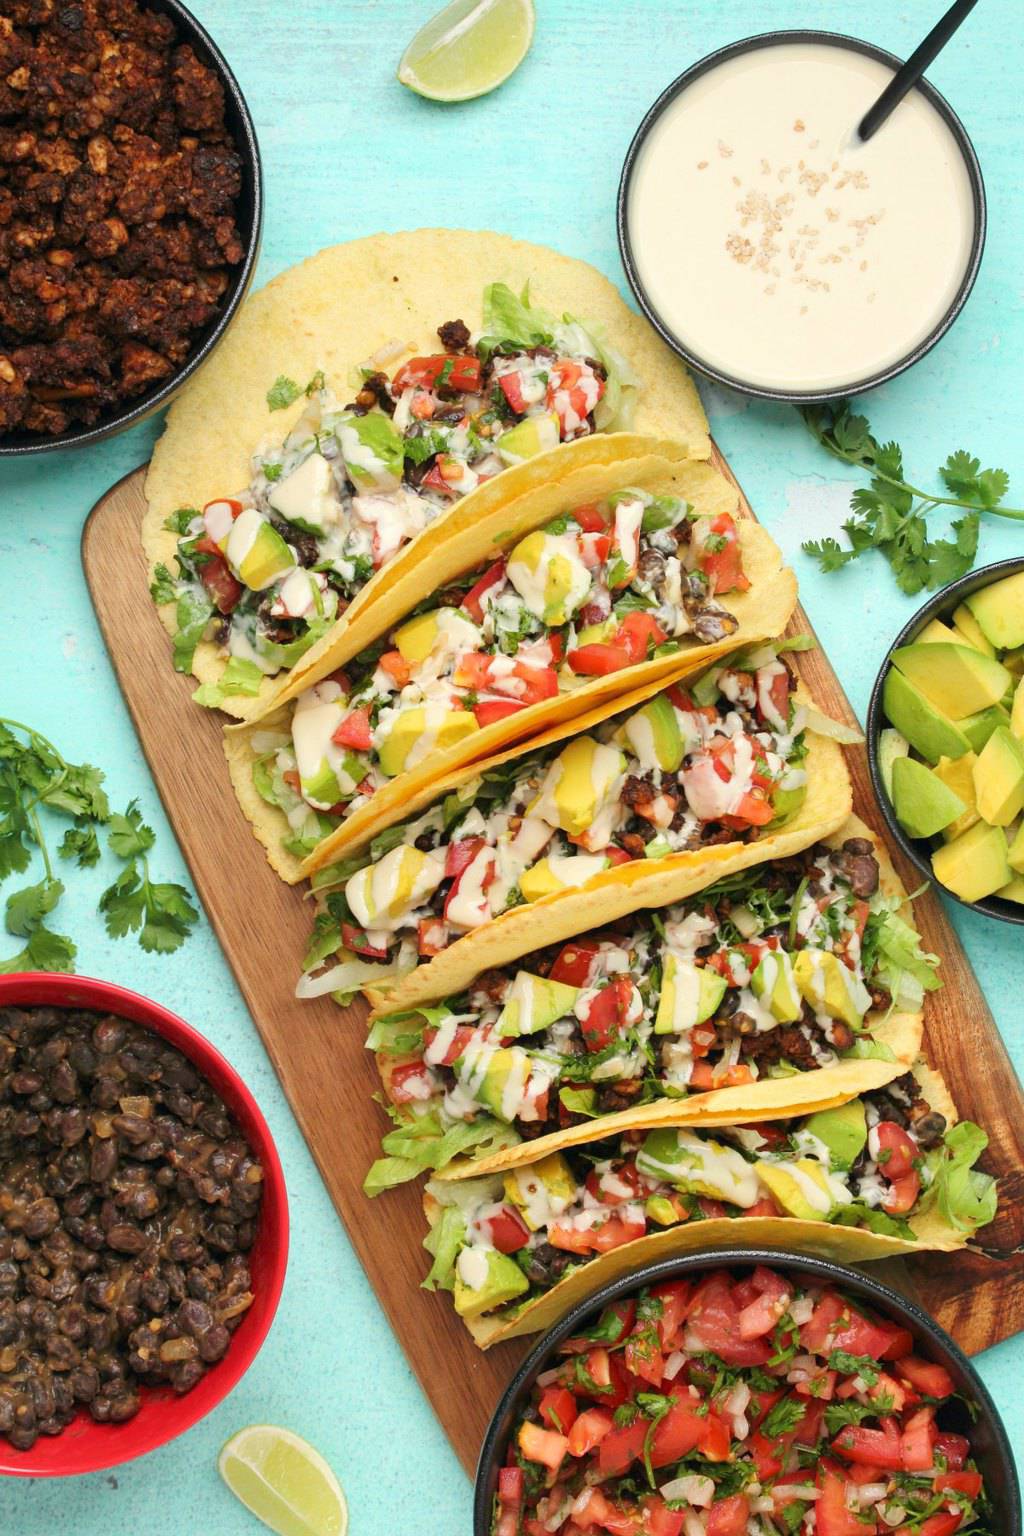 Vegan tacos with black beans, vegan taco meat, pico de gallo, avocado and tahini sauce on a wooden board. 